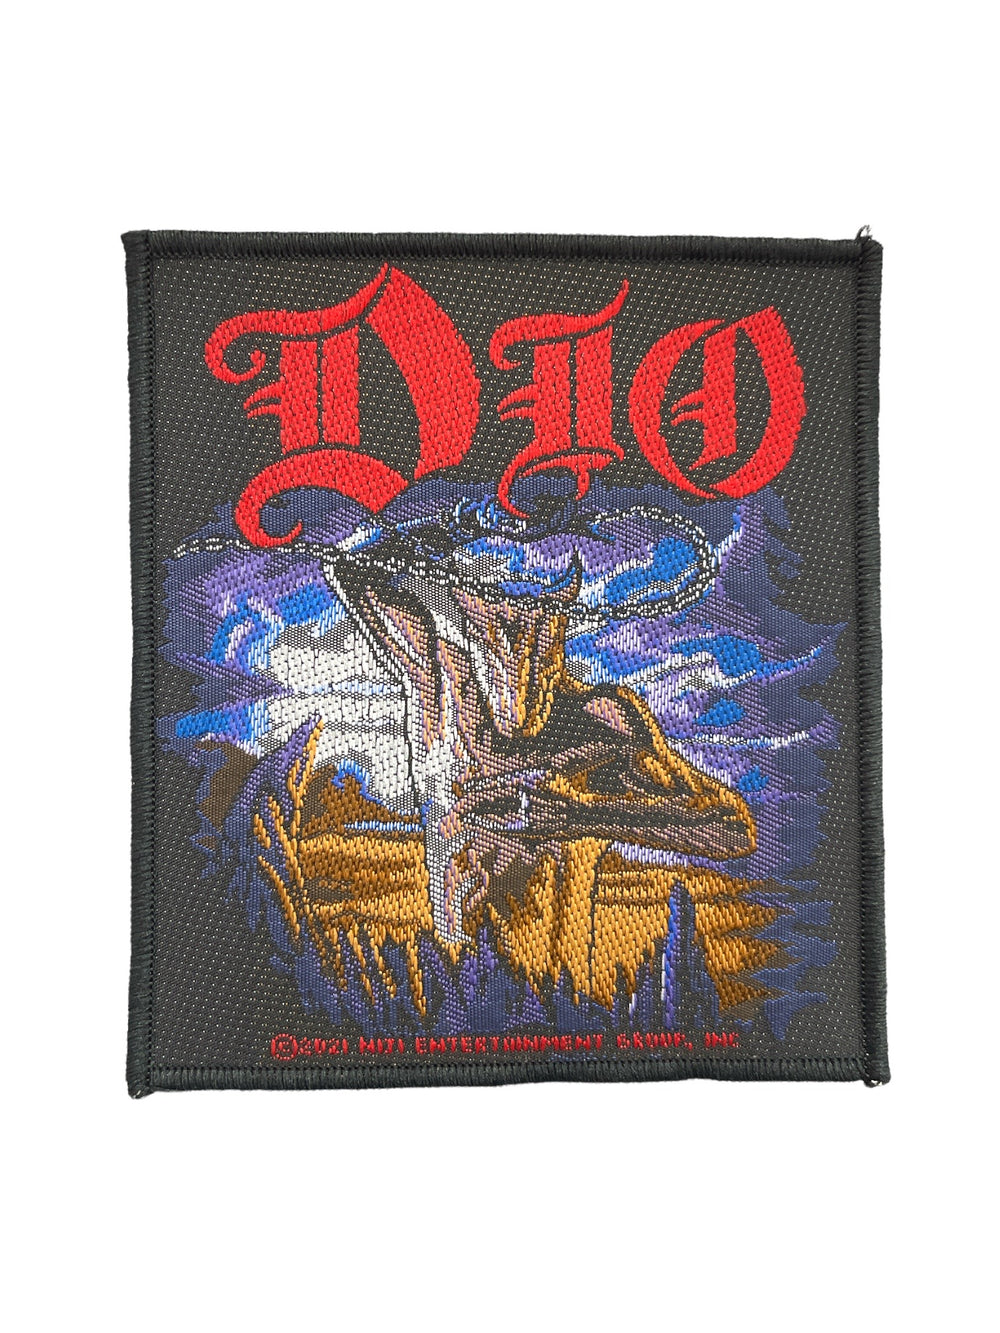 DIO Murray Official Woven Patch Brand New